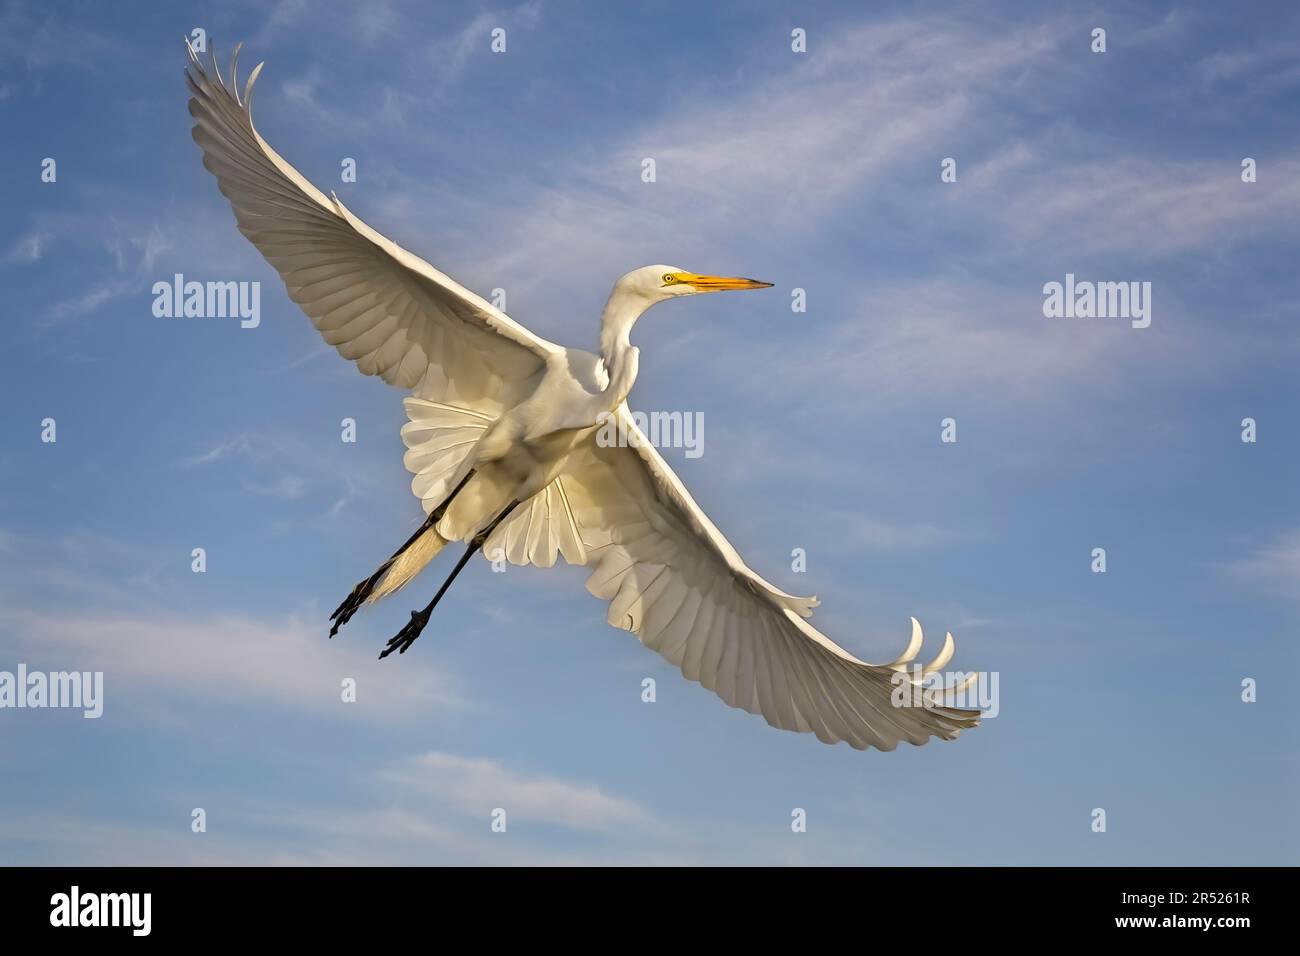 Great Egret Flight - Great Egret in a graceful flight pose.  The Great Egrets large wing span look almost angelica when spread out.  The large white b Stock Photo